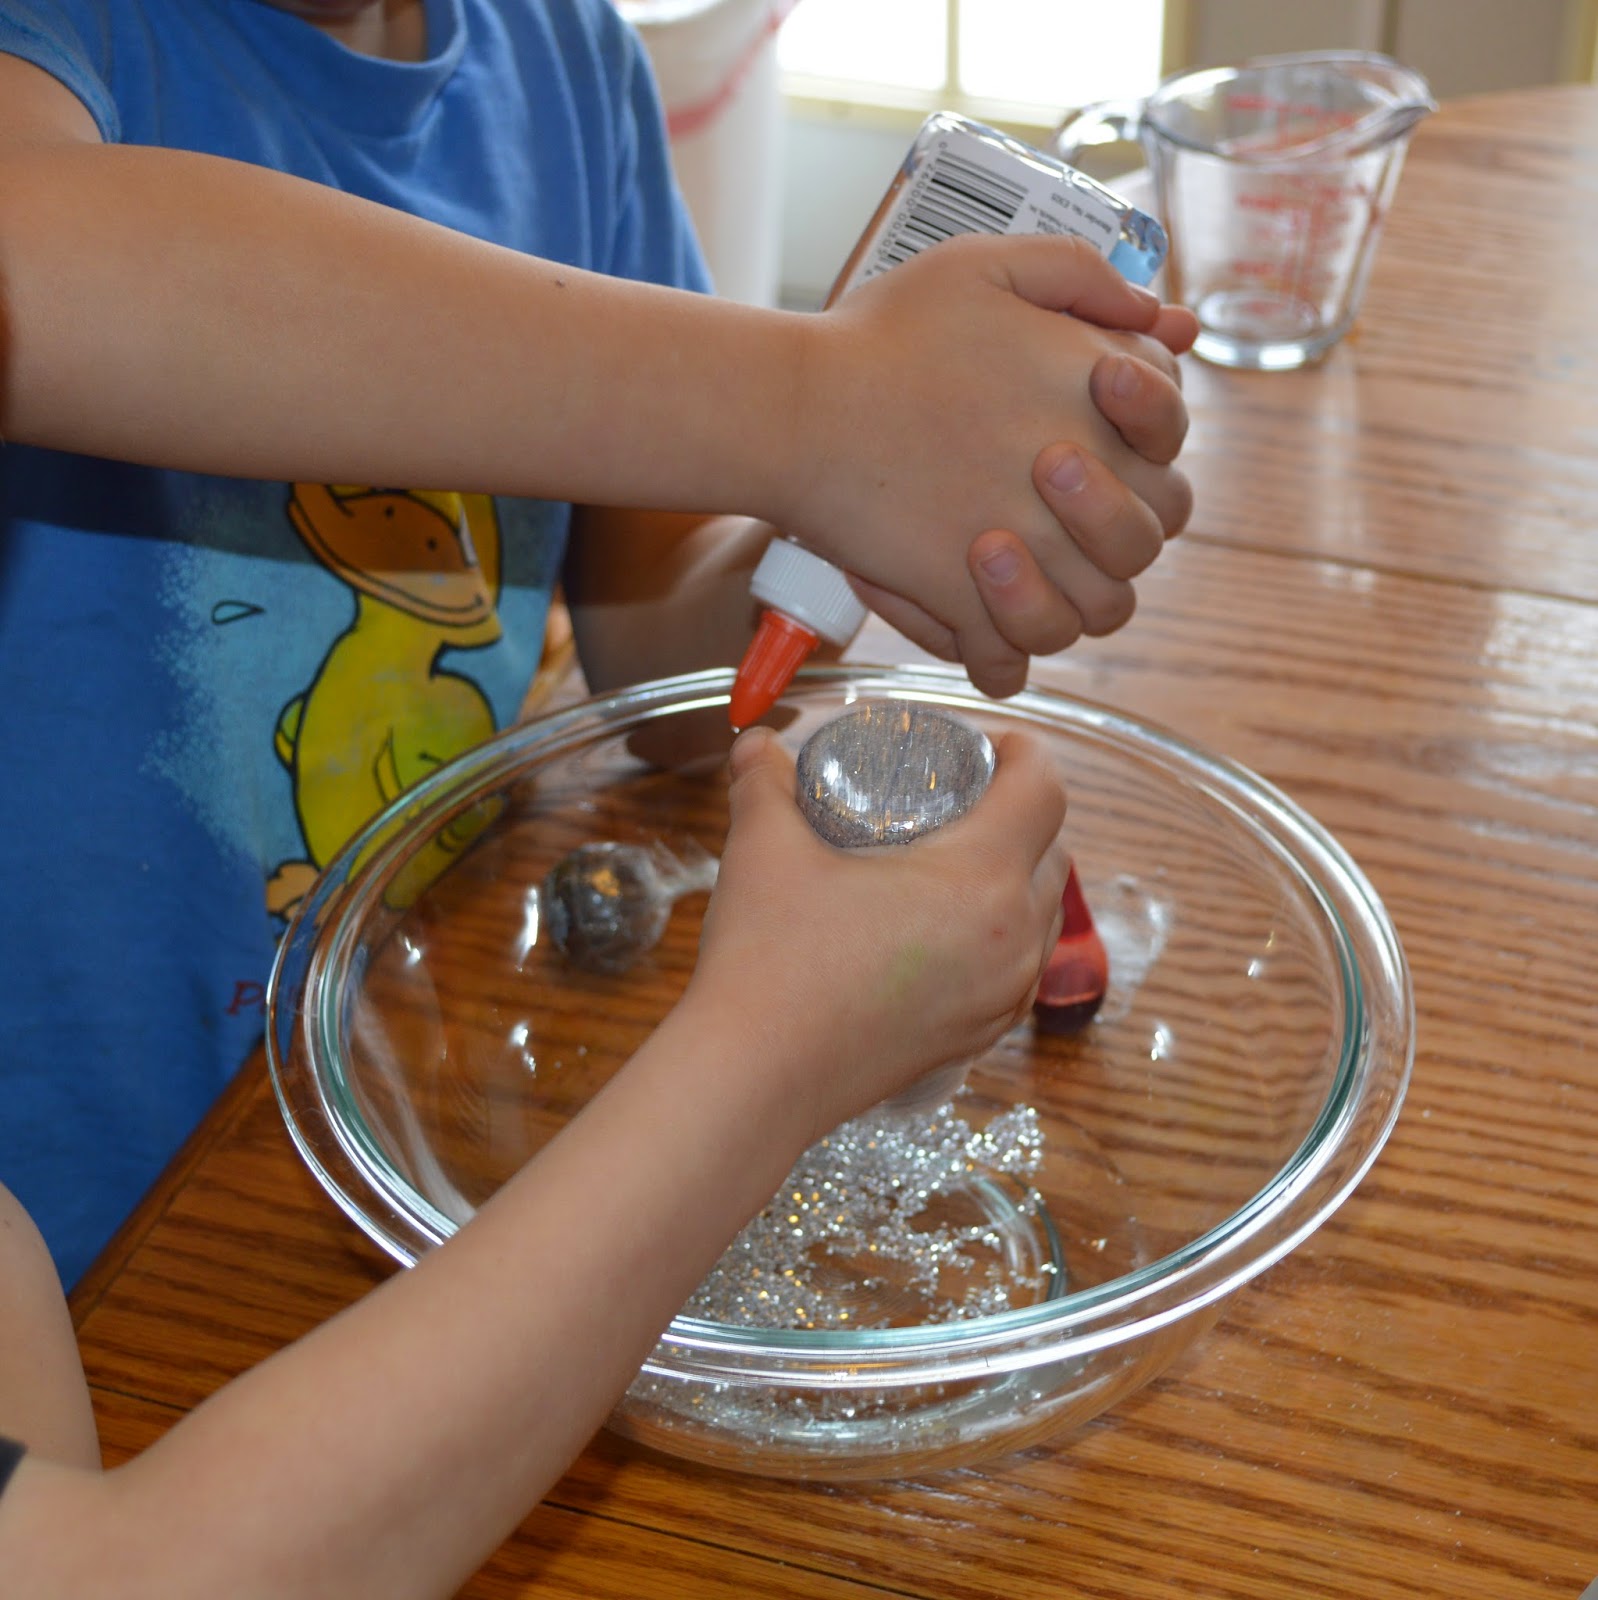 Make your own Flubber @ whatilivefor.net